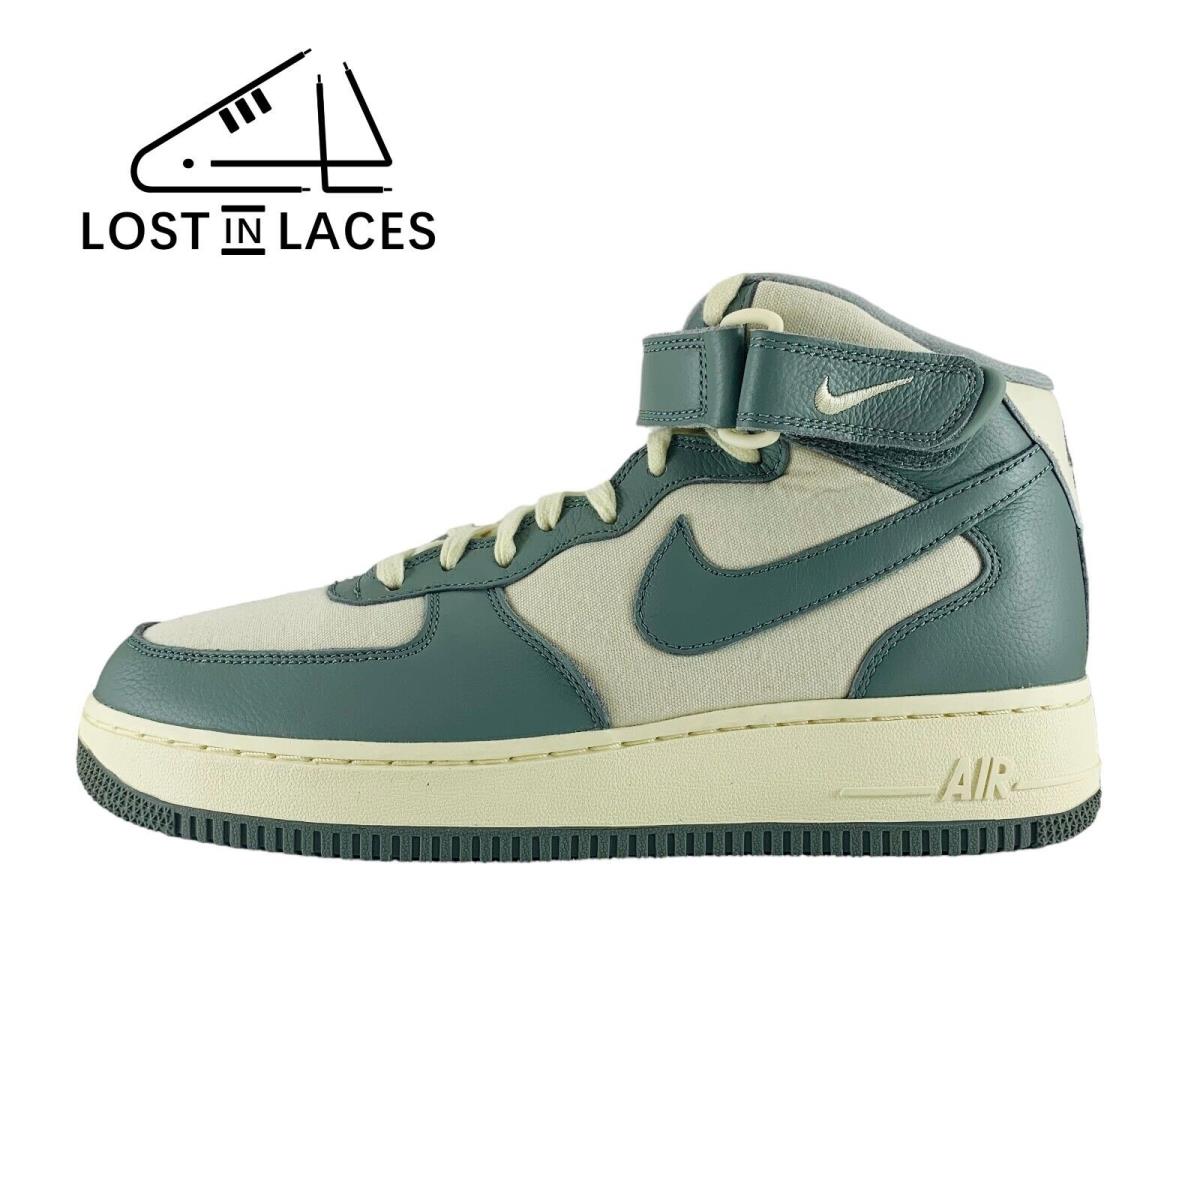 Nike Air Force 1 Mid `07 LX Nbhd Mica Green Sneakers Shoes Men`s Sizes